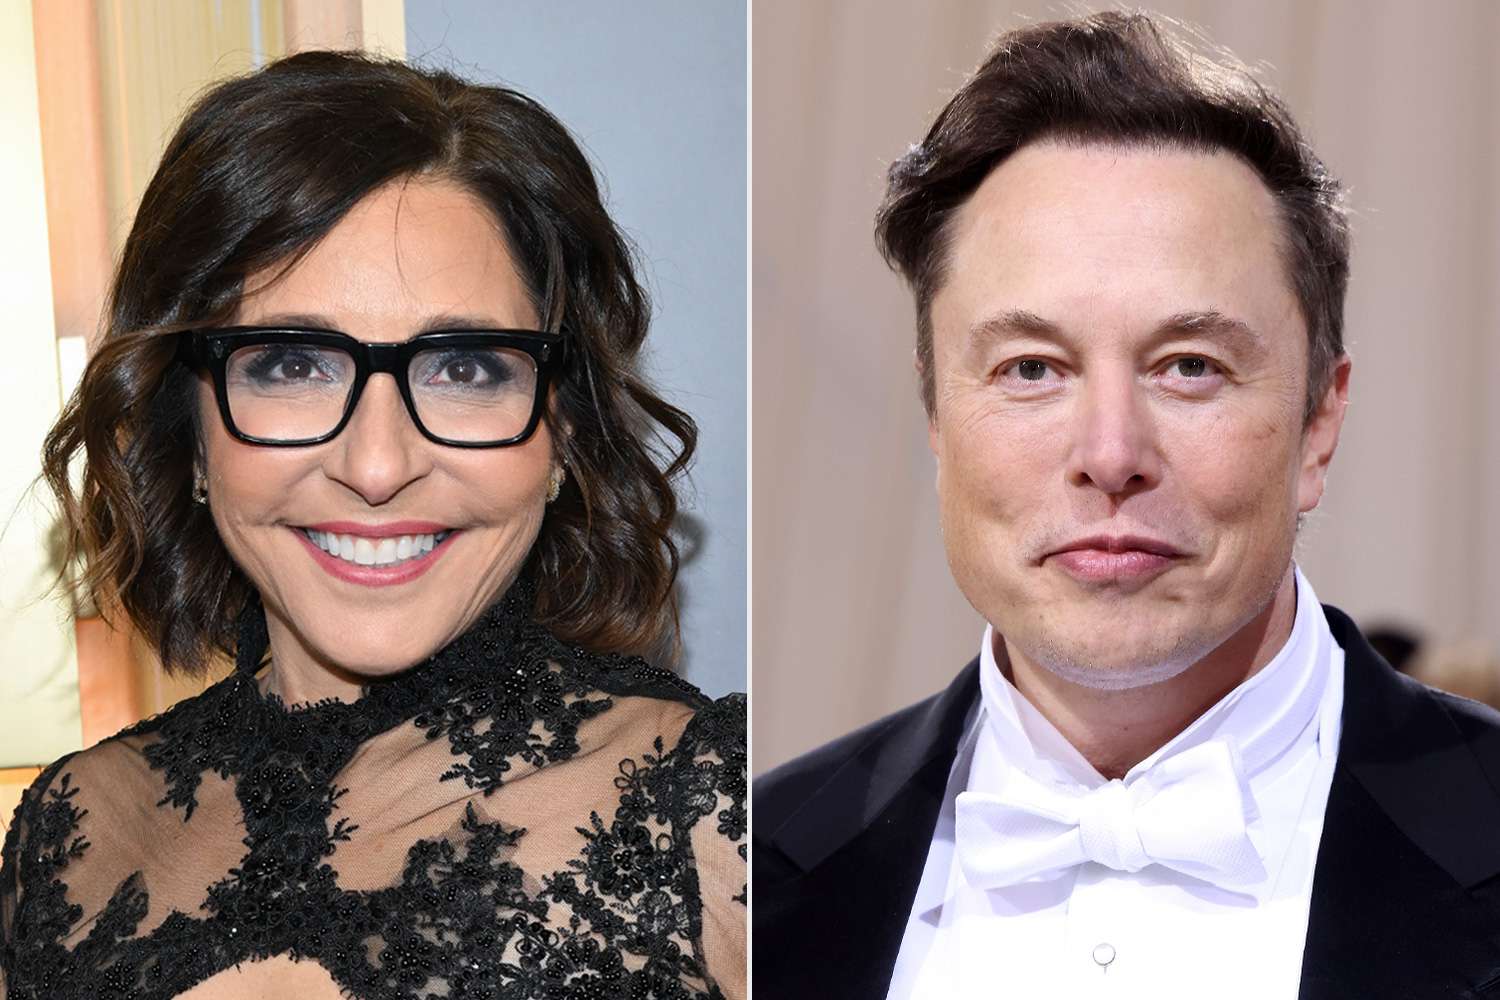 ceo-linda-yaccarino-stands-by-elon-musk-amid-controversial-remarks-to-advertisers